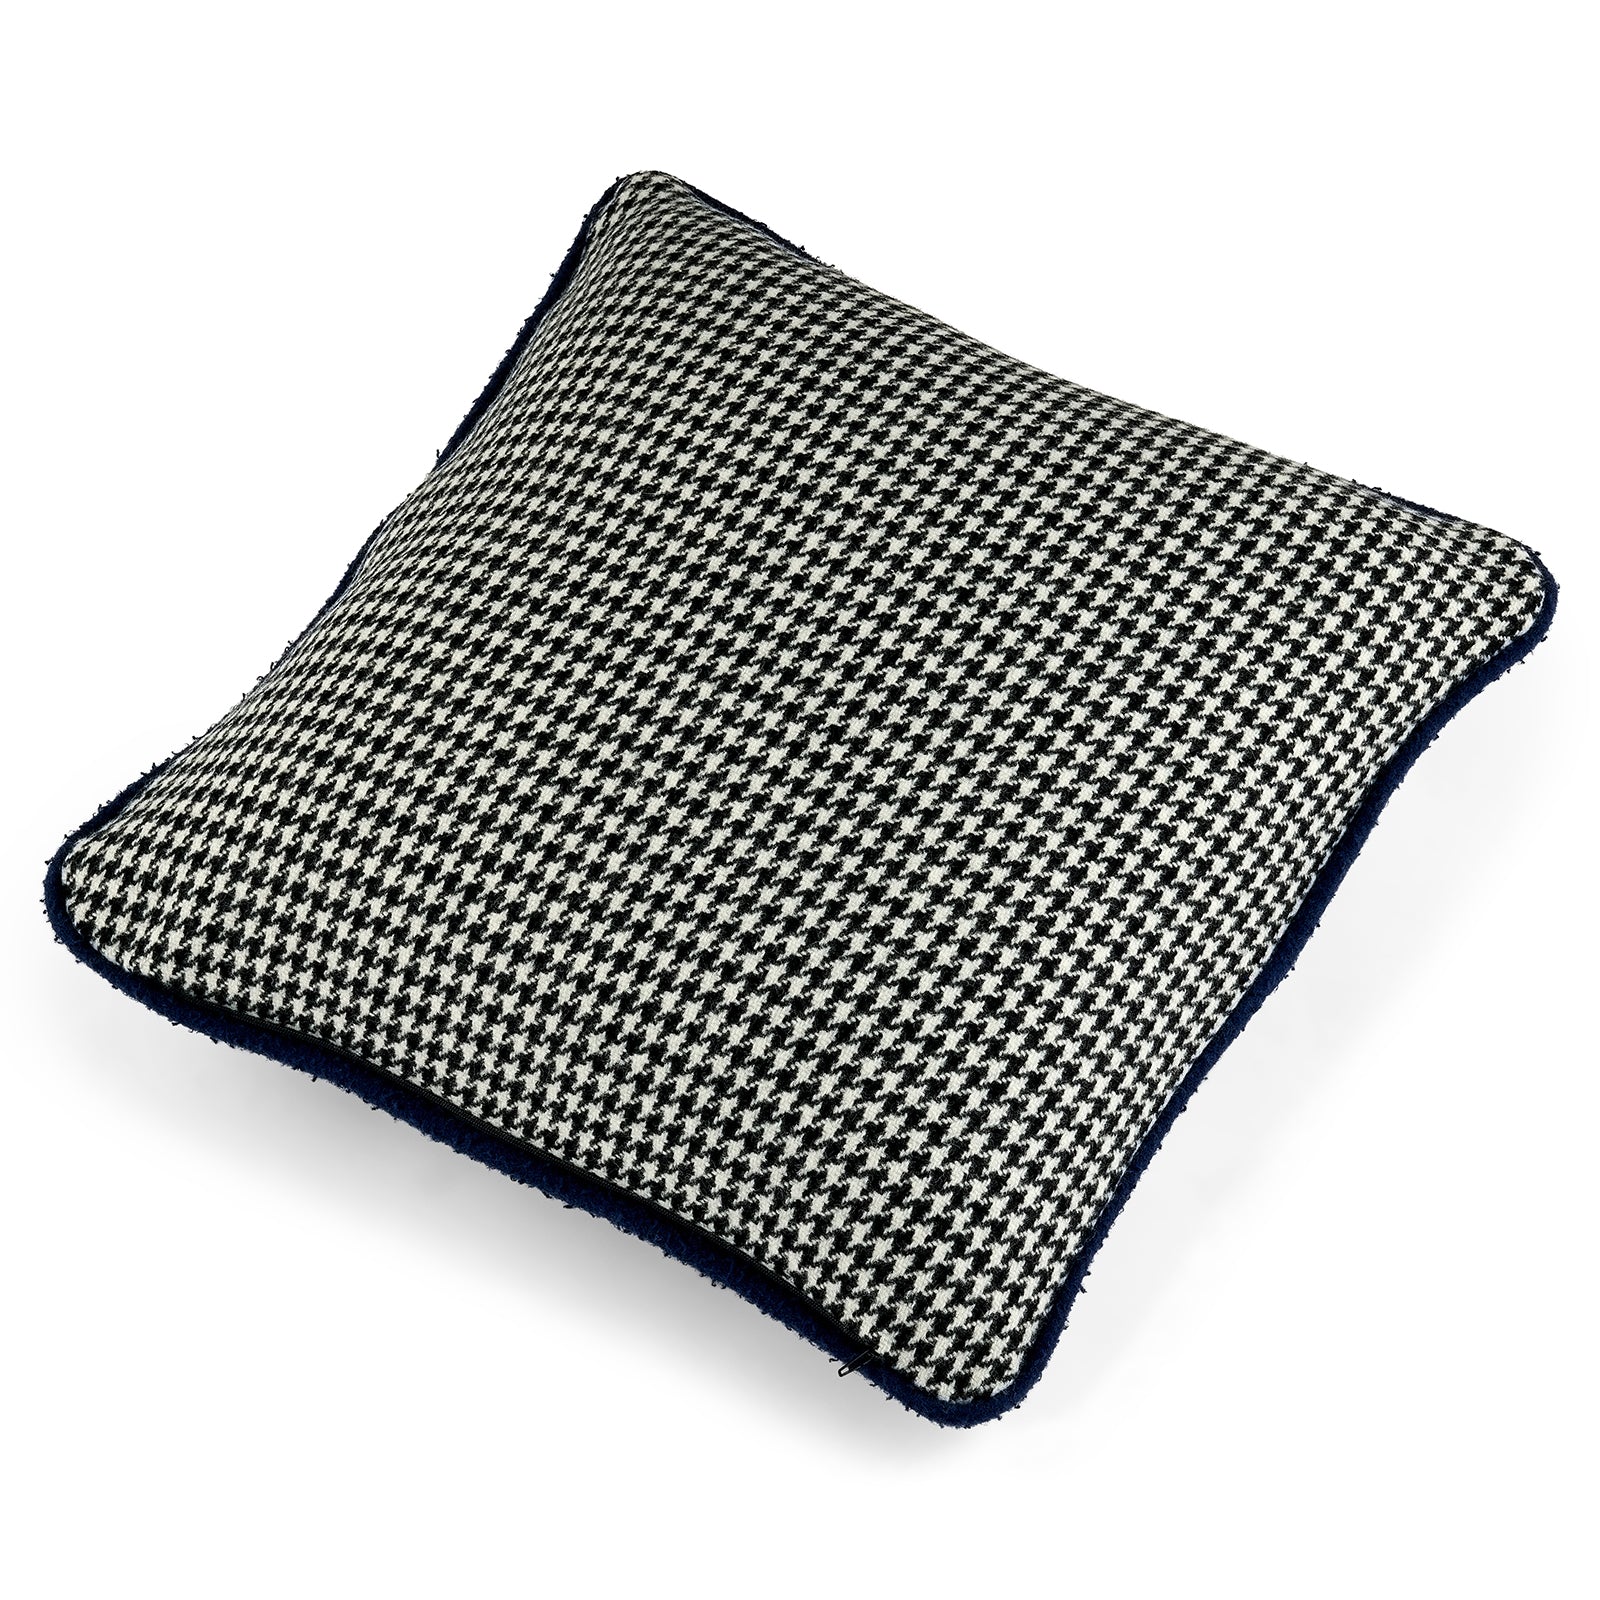 Monochrome Houndstooth with Blue Cushion Cover